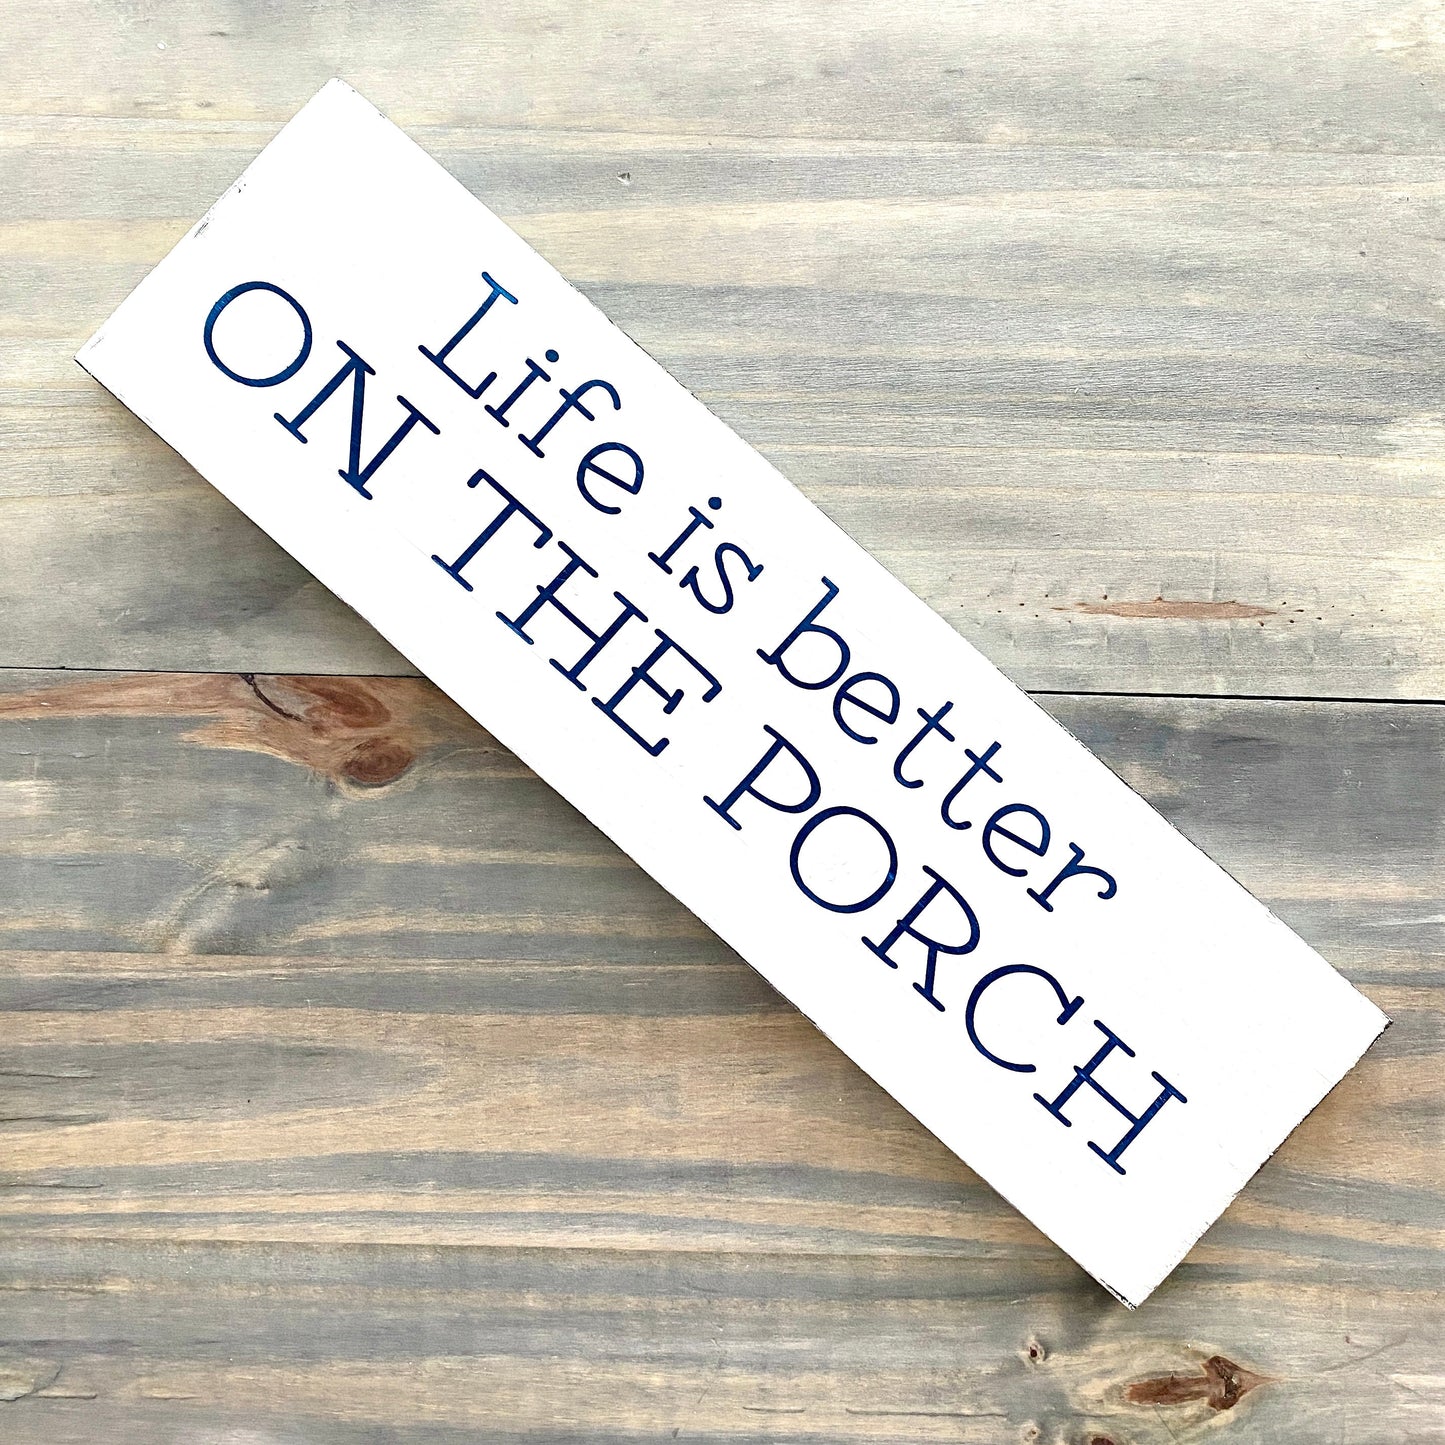 Life is Better on the Porch Sign